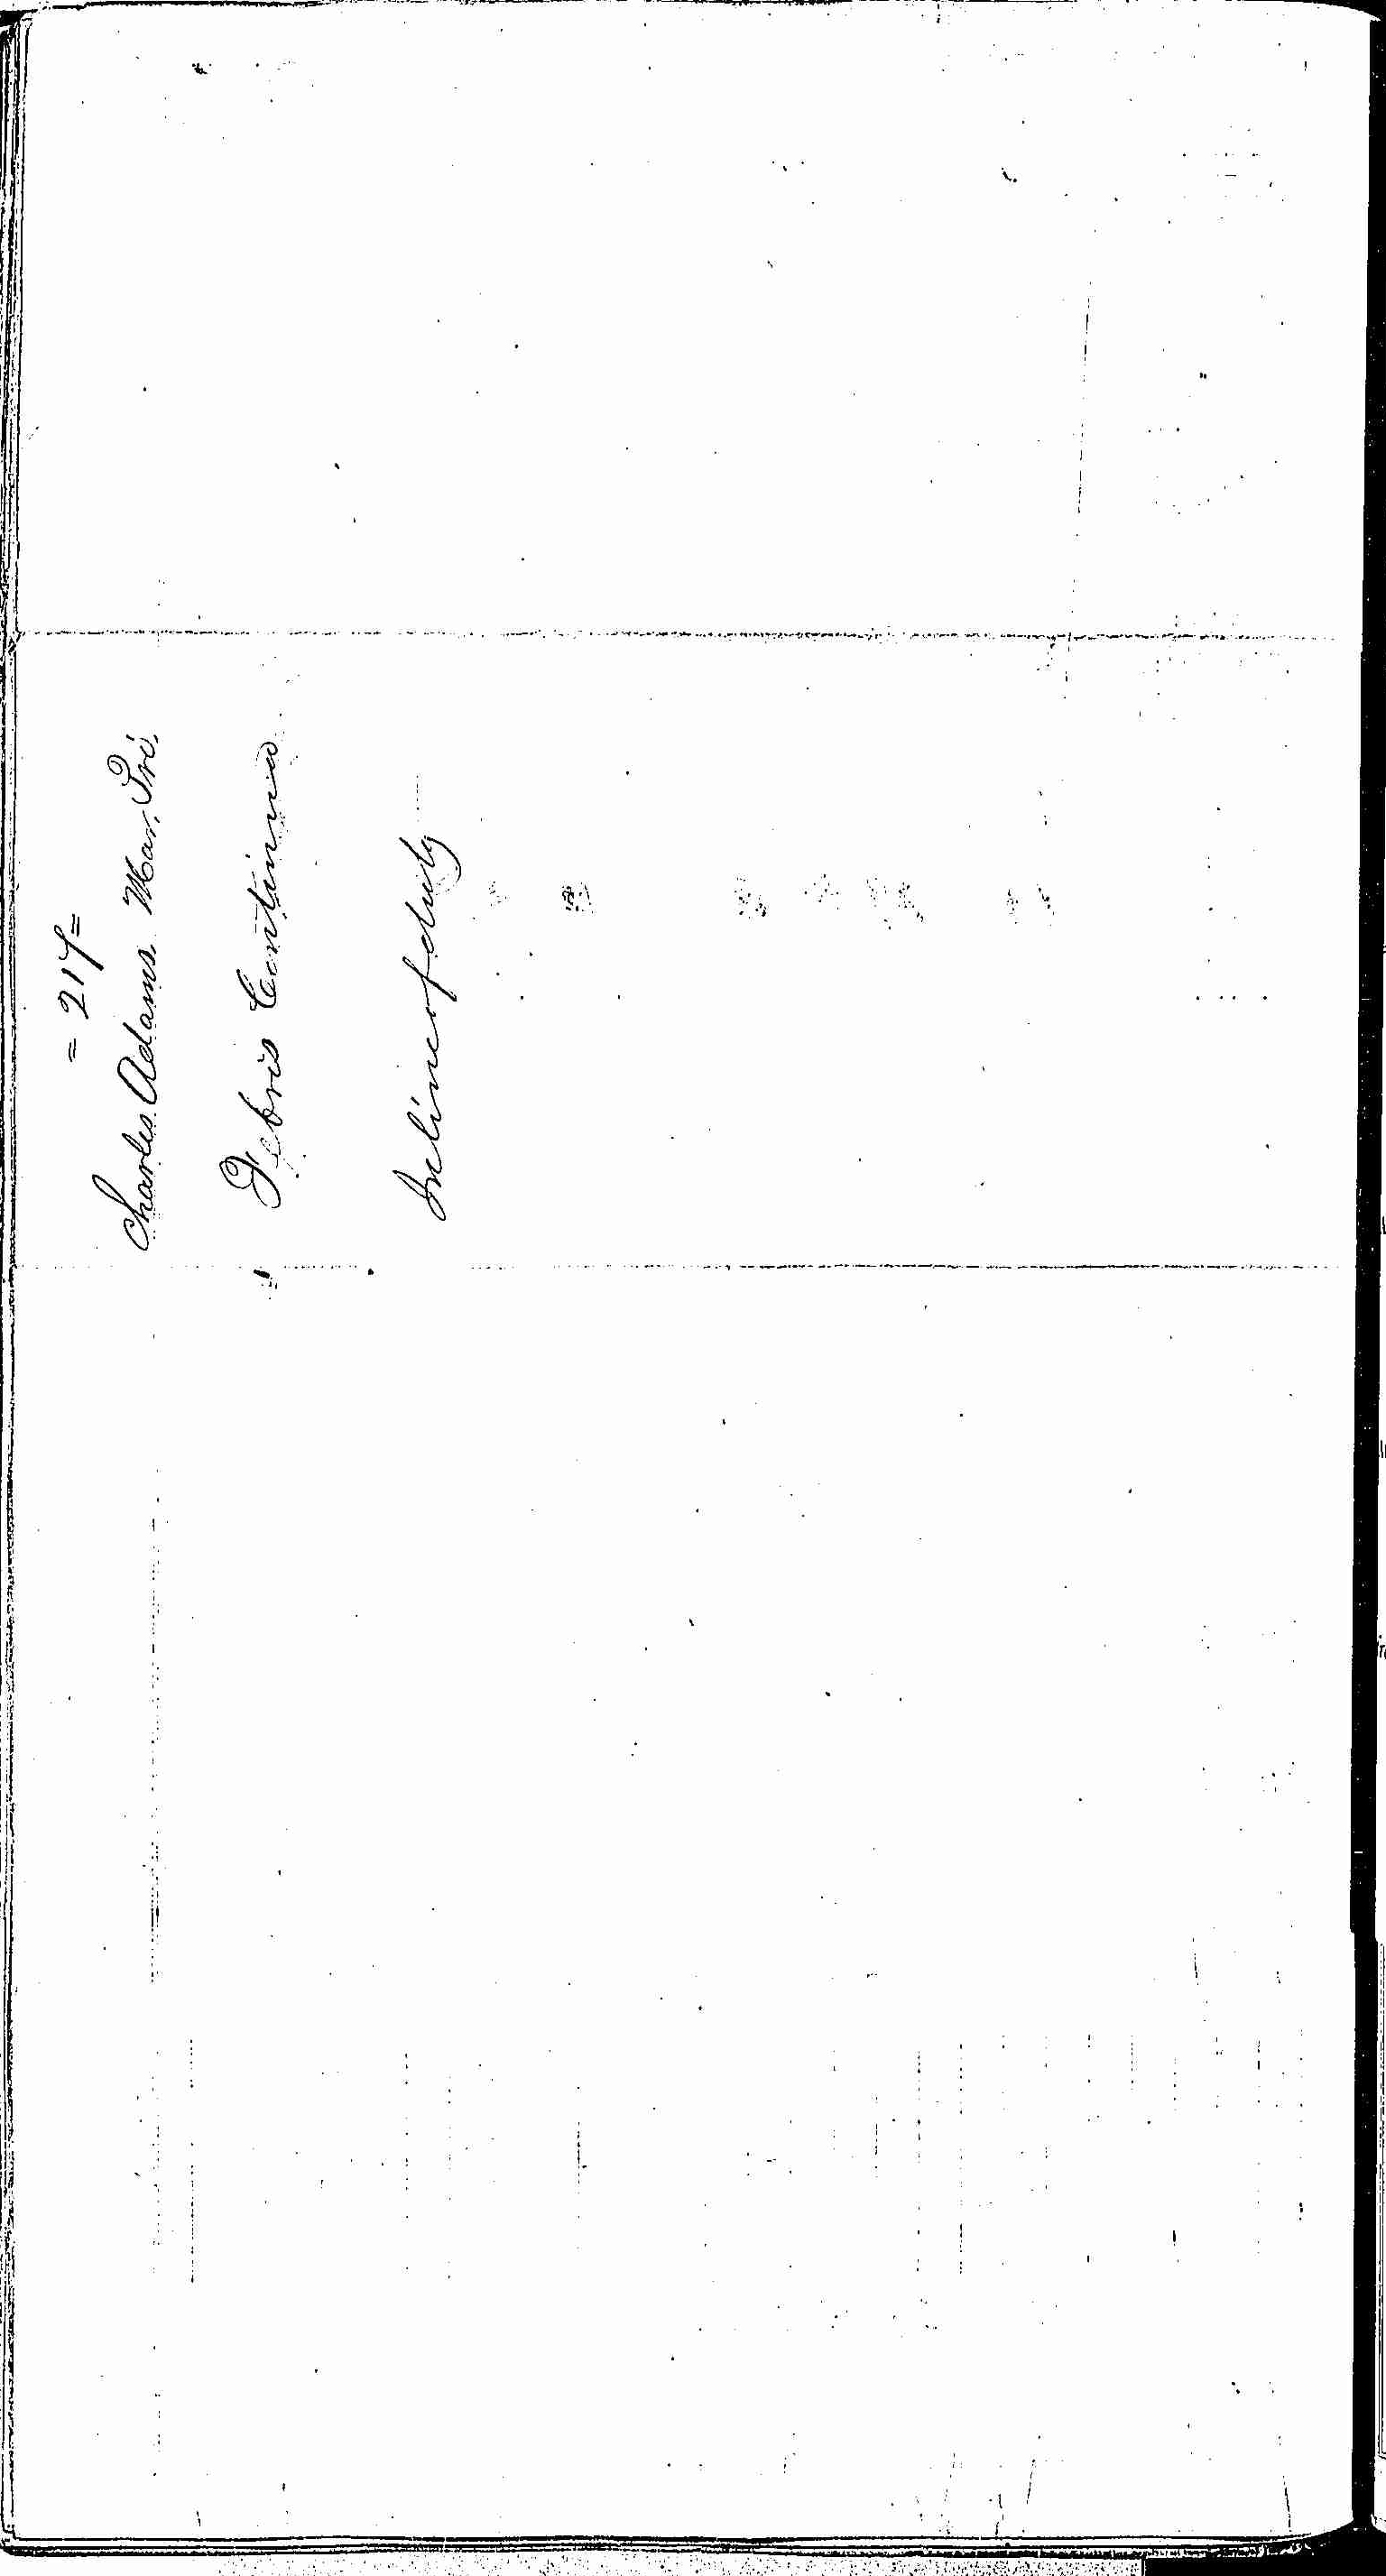 Entry for Charles Adams (page 2 of 2) in the log Hospital Tickets and Case Papers - Naval Hospital - Washington, D.C. - 1866-68